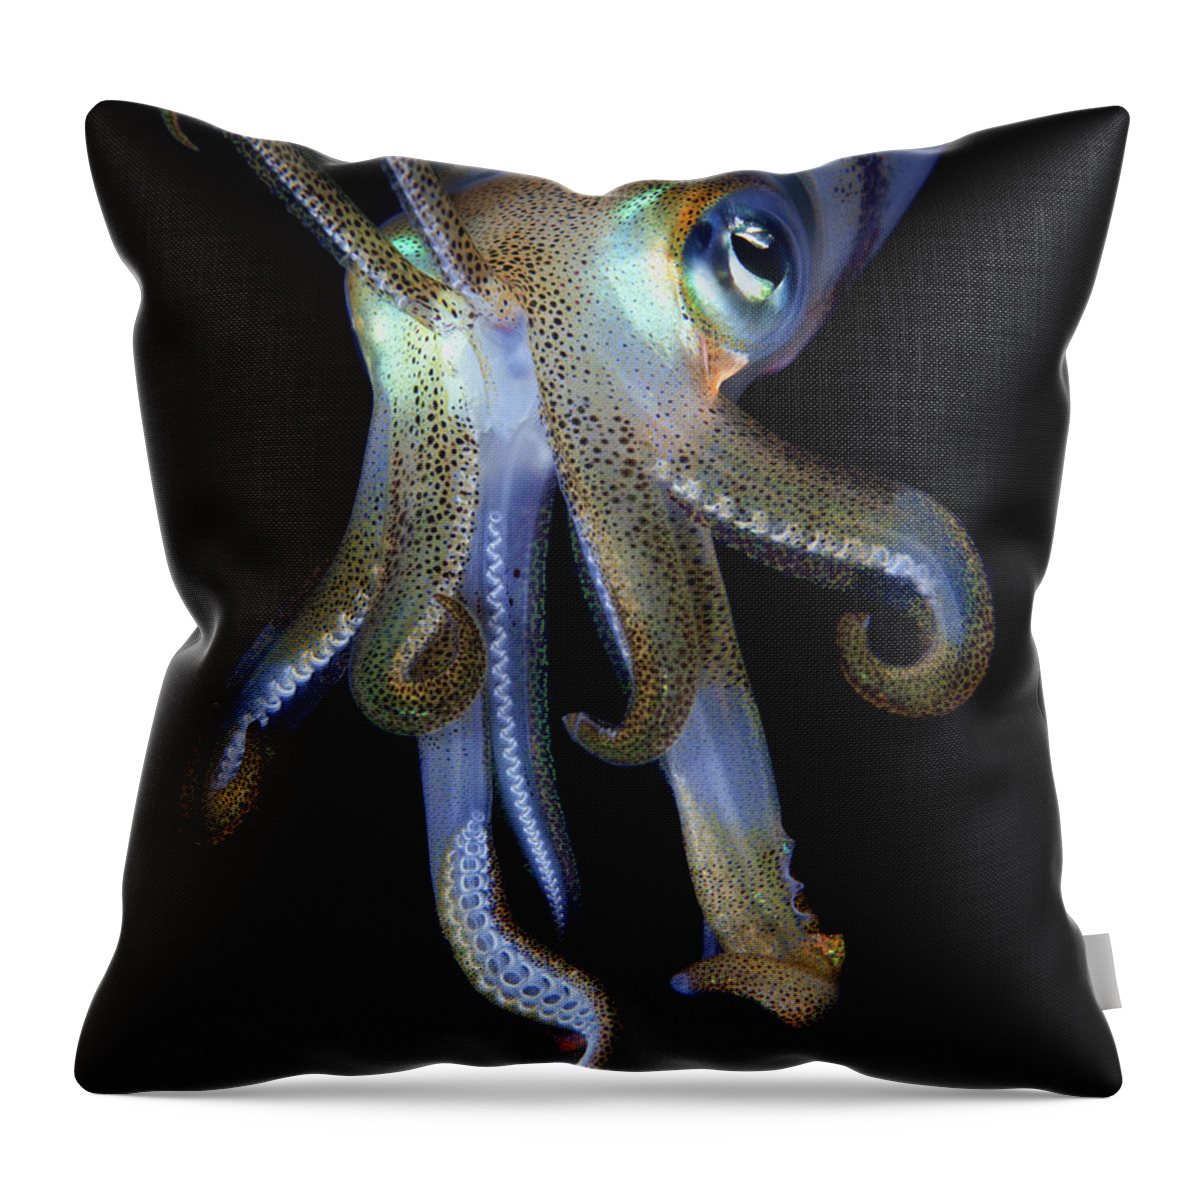 Underwater Throw Pillow featuring the photograph Night Observer by Nature, Underwater And Art Photos. Www.narchuk.com